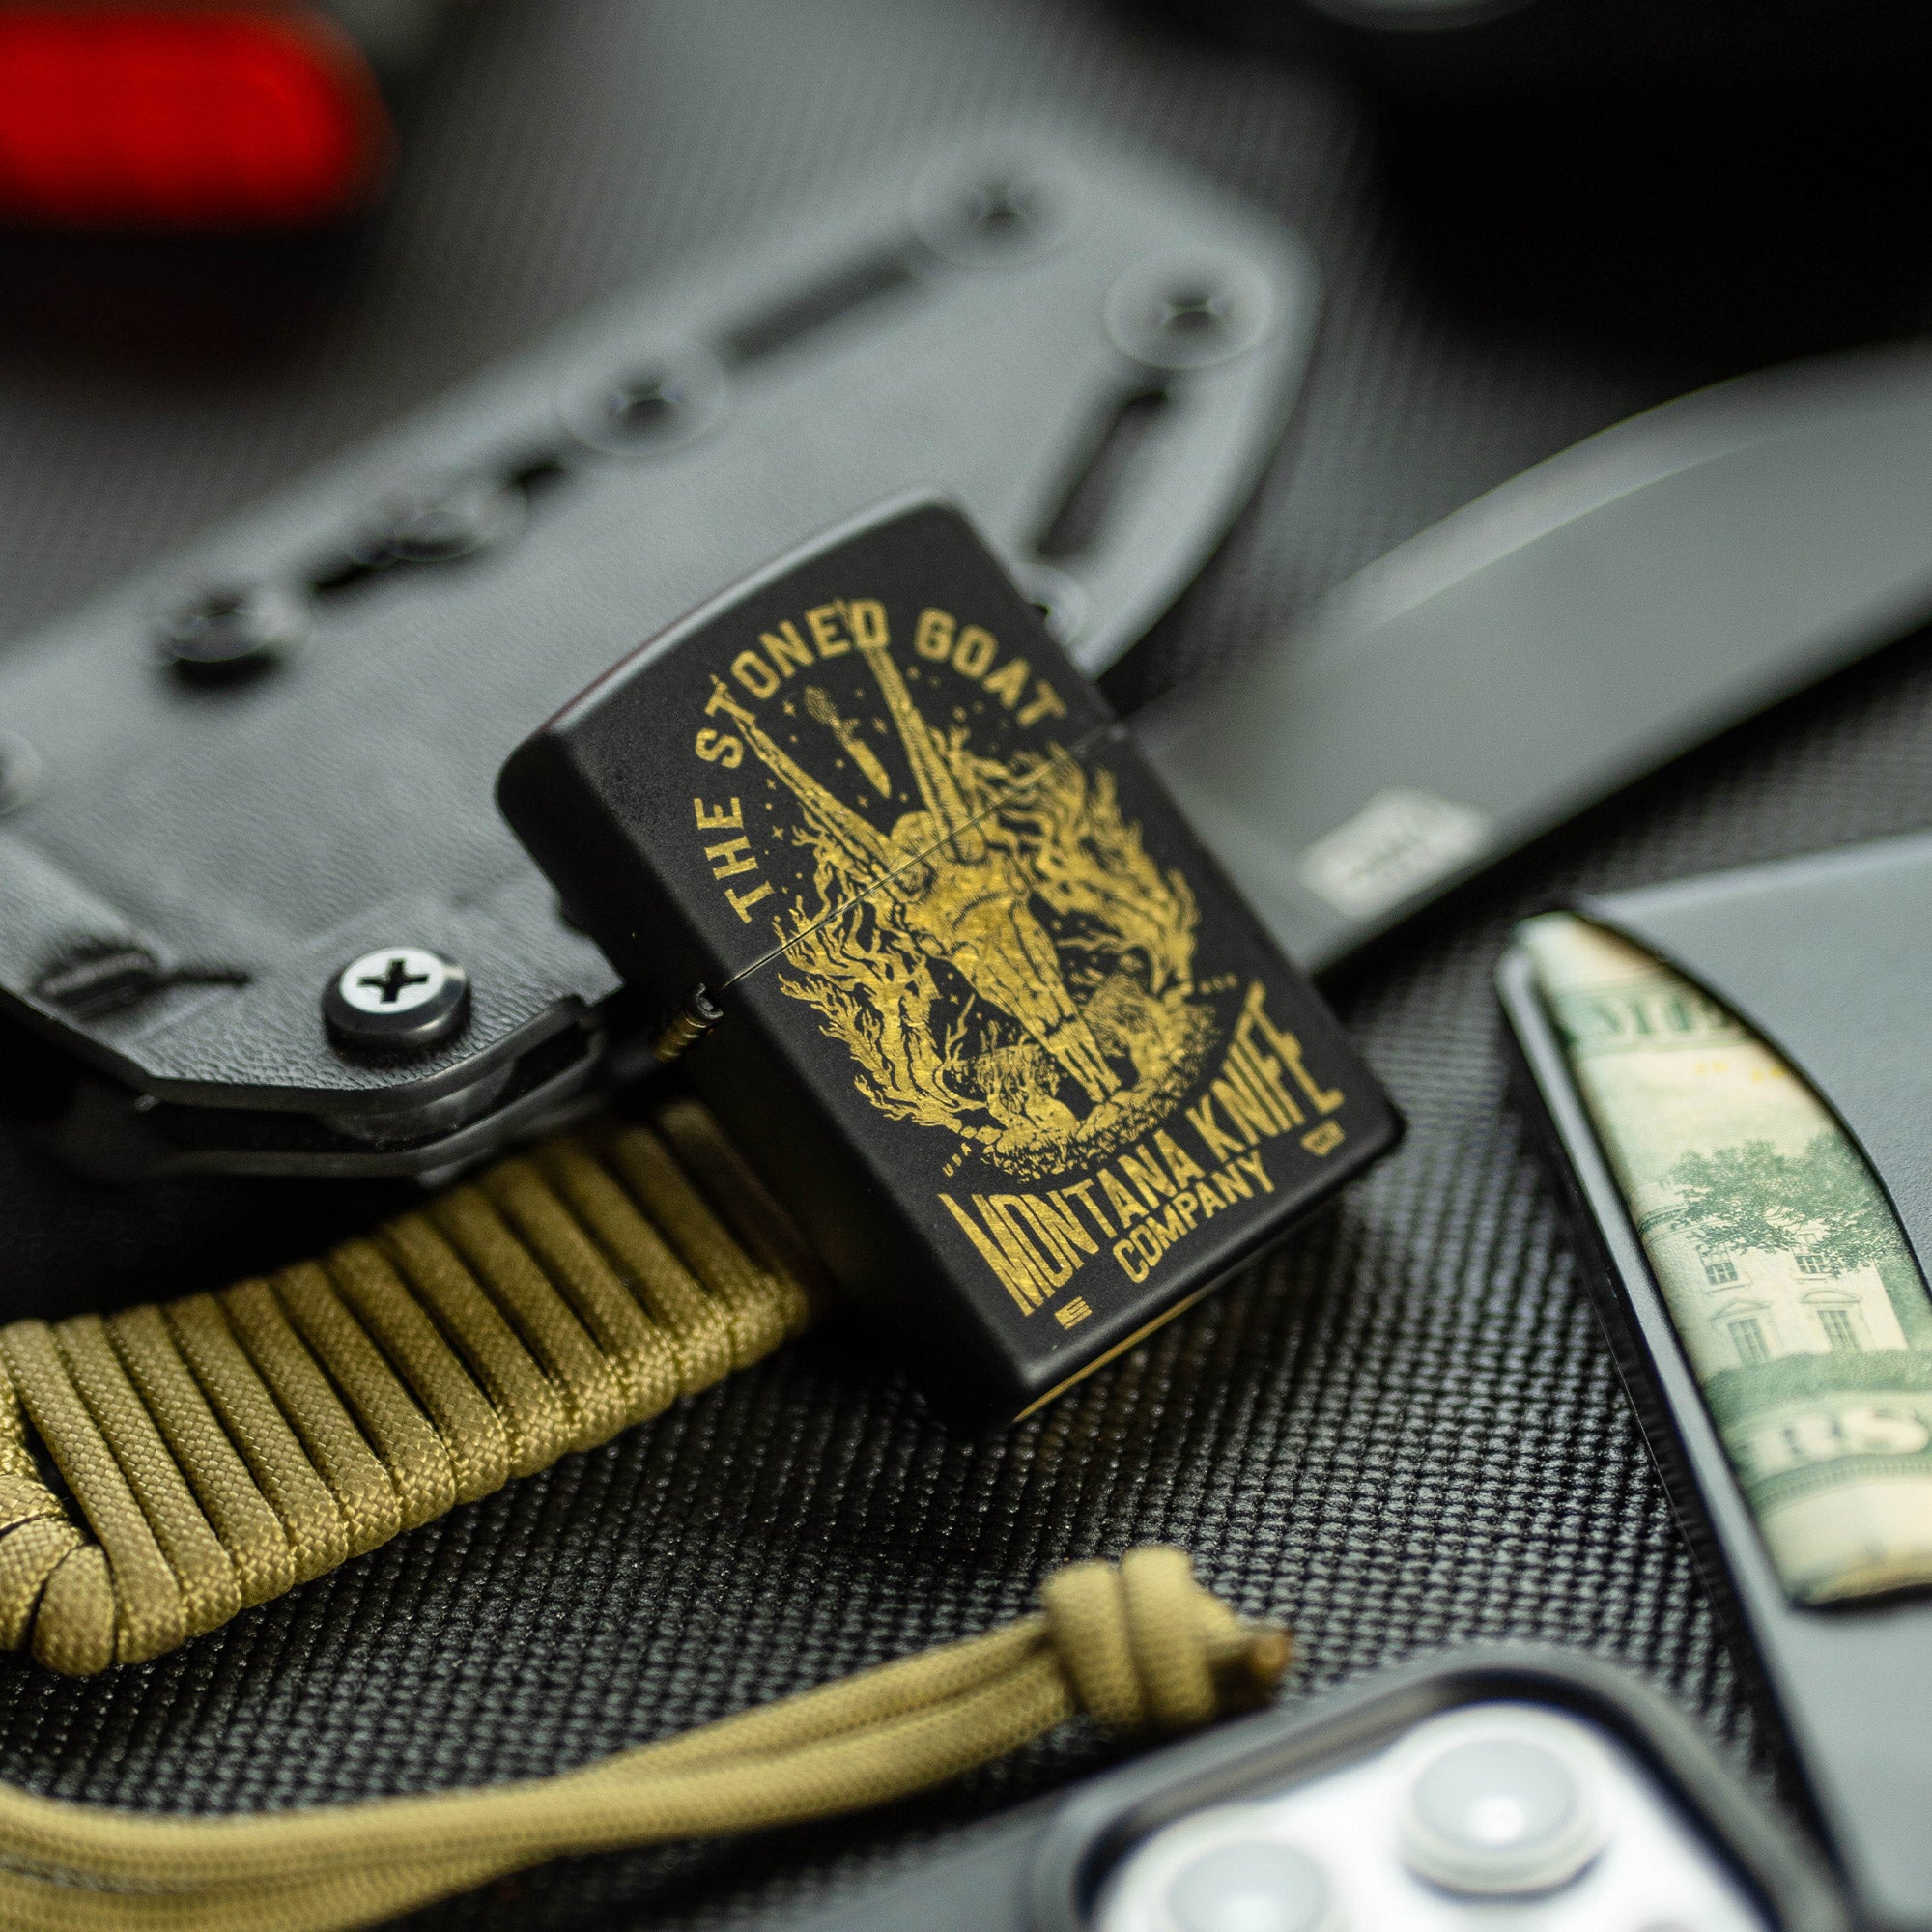 THE STONED GOAT - TRADITIONAL WINDPROOF ZIPPO LIGHTER - USA MADE